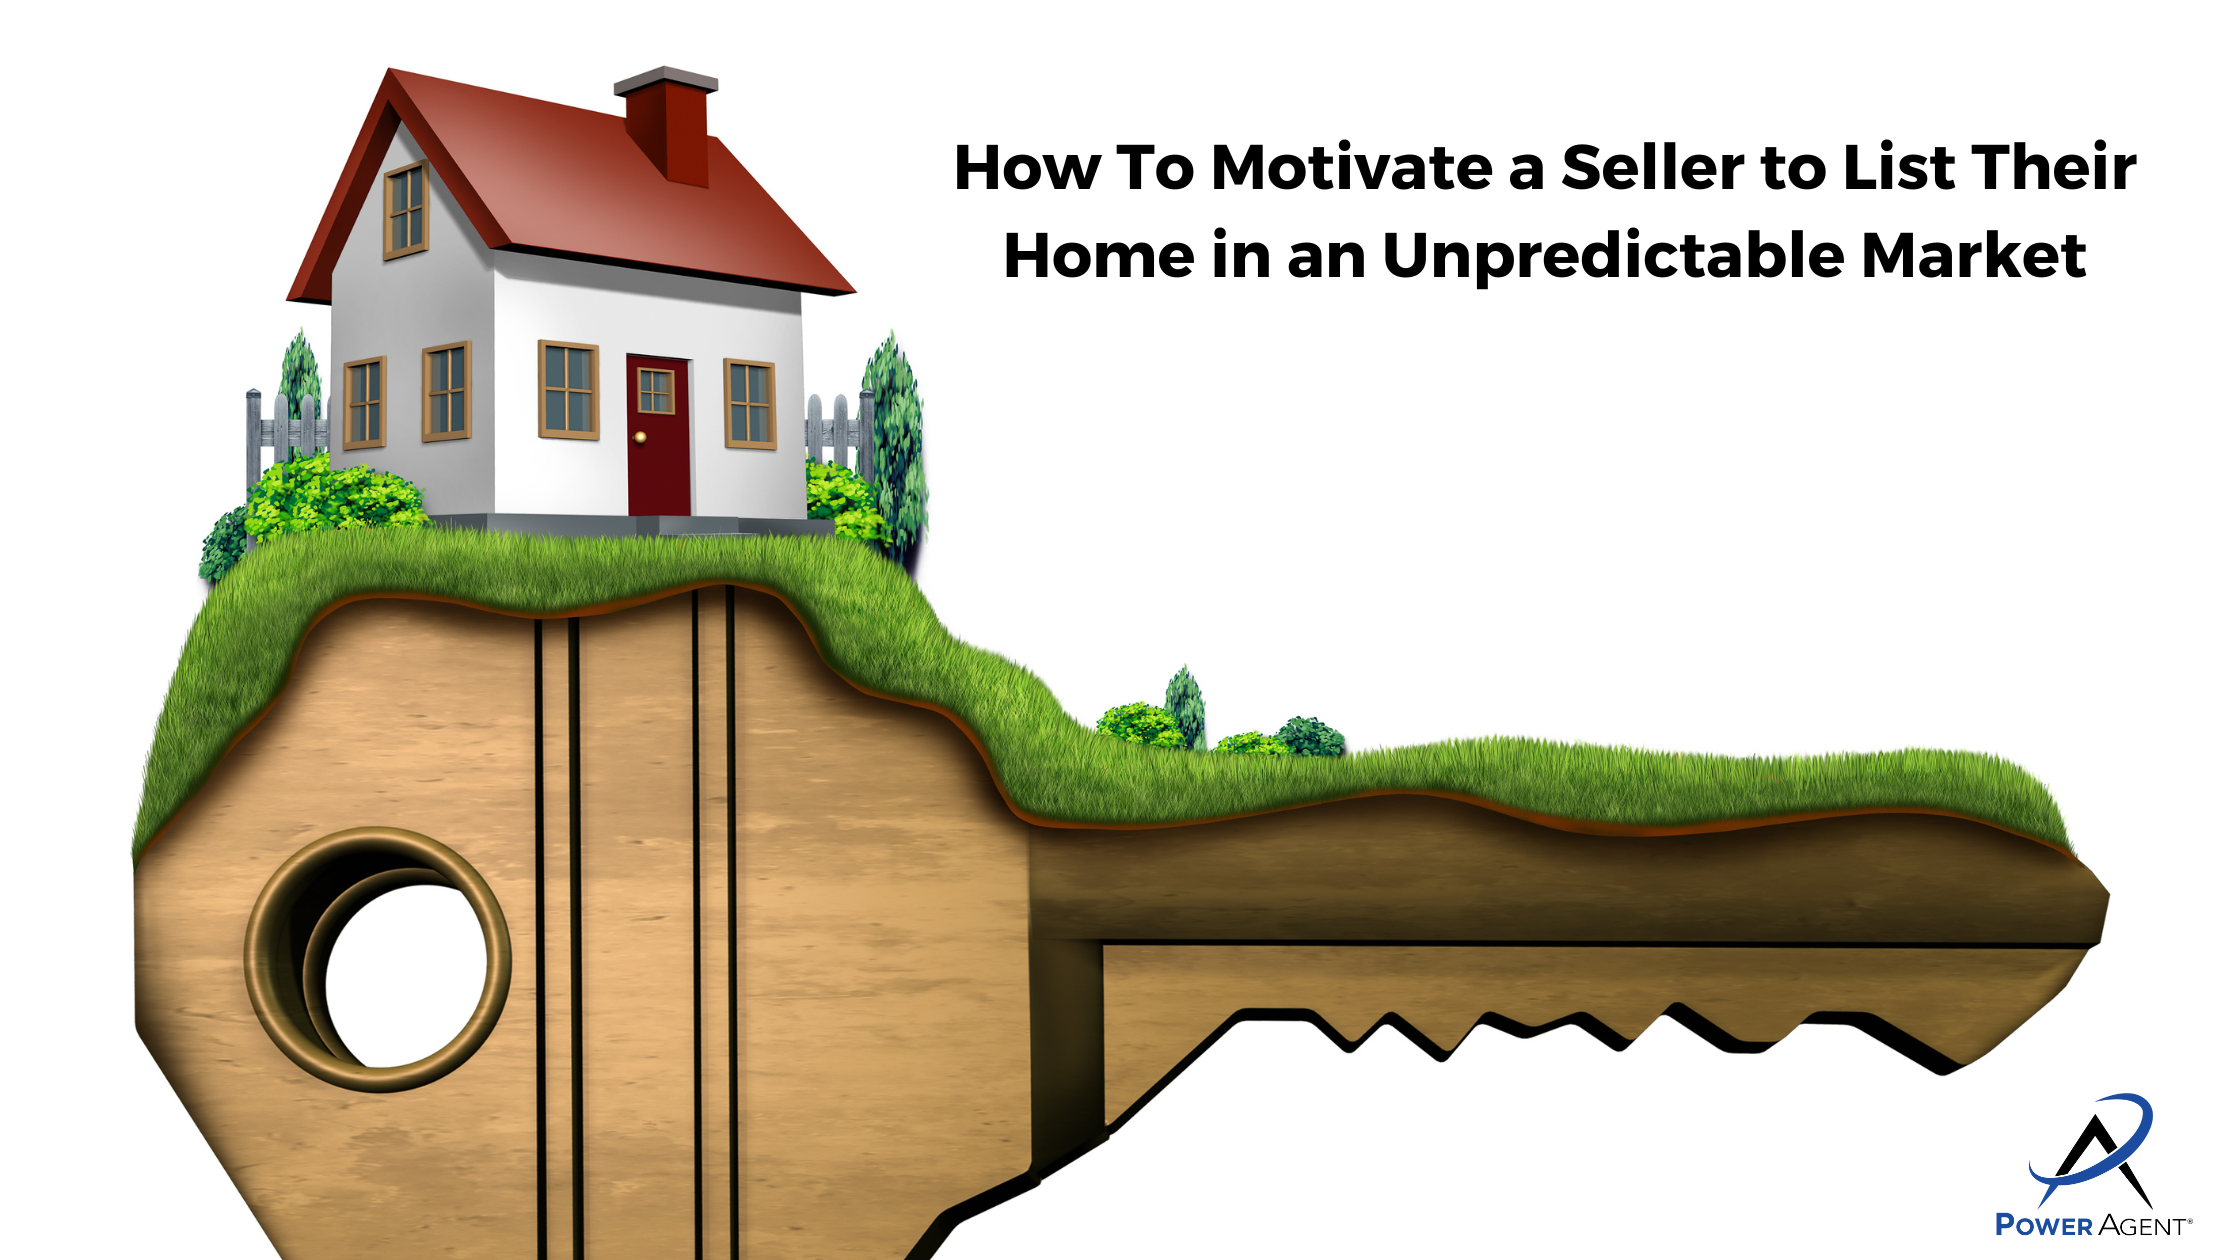 How To Motivate a Seller to List Their Home in an Unpredictable Market